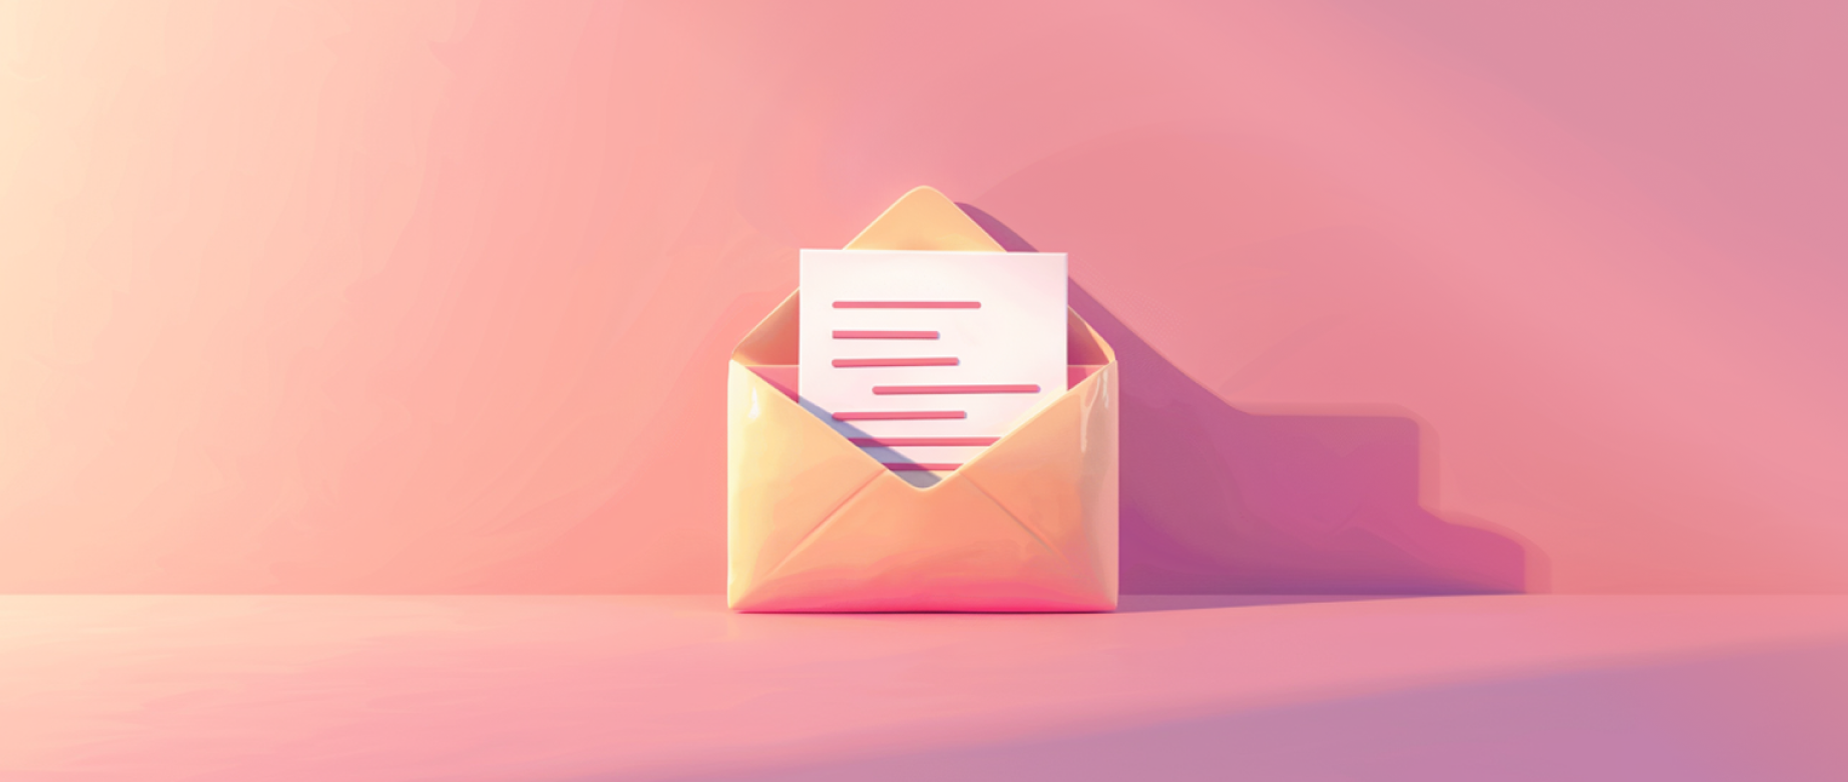 A textured, three-dimensional illustration of the familiar email icon.